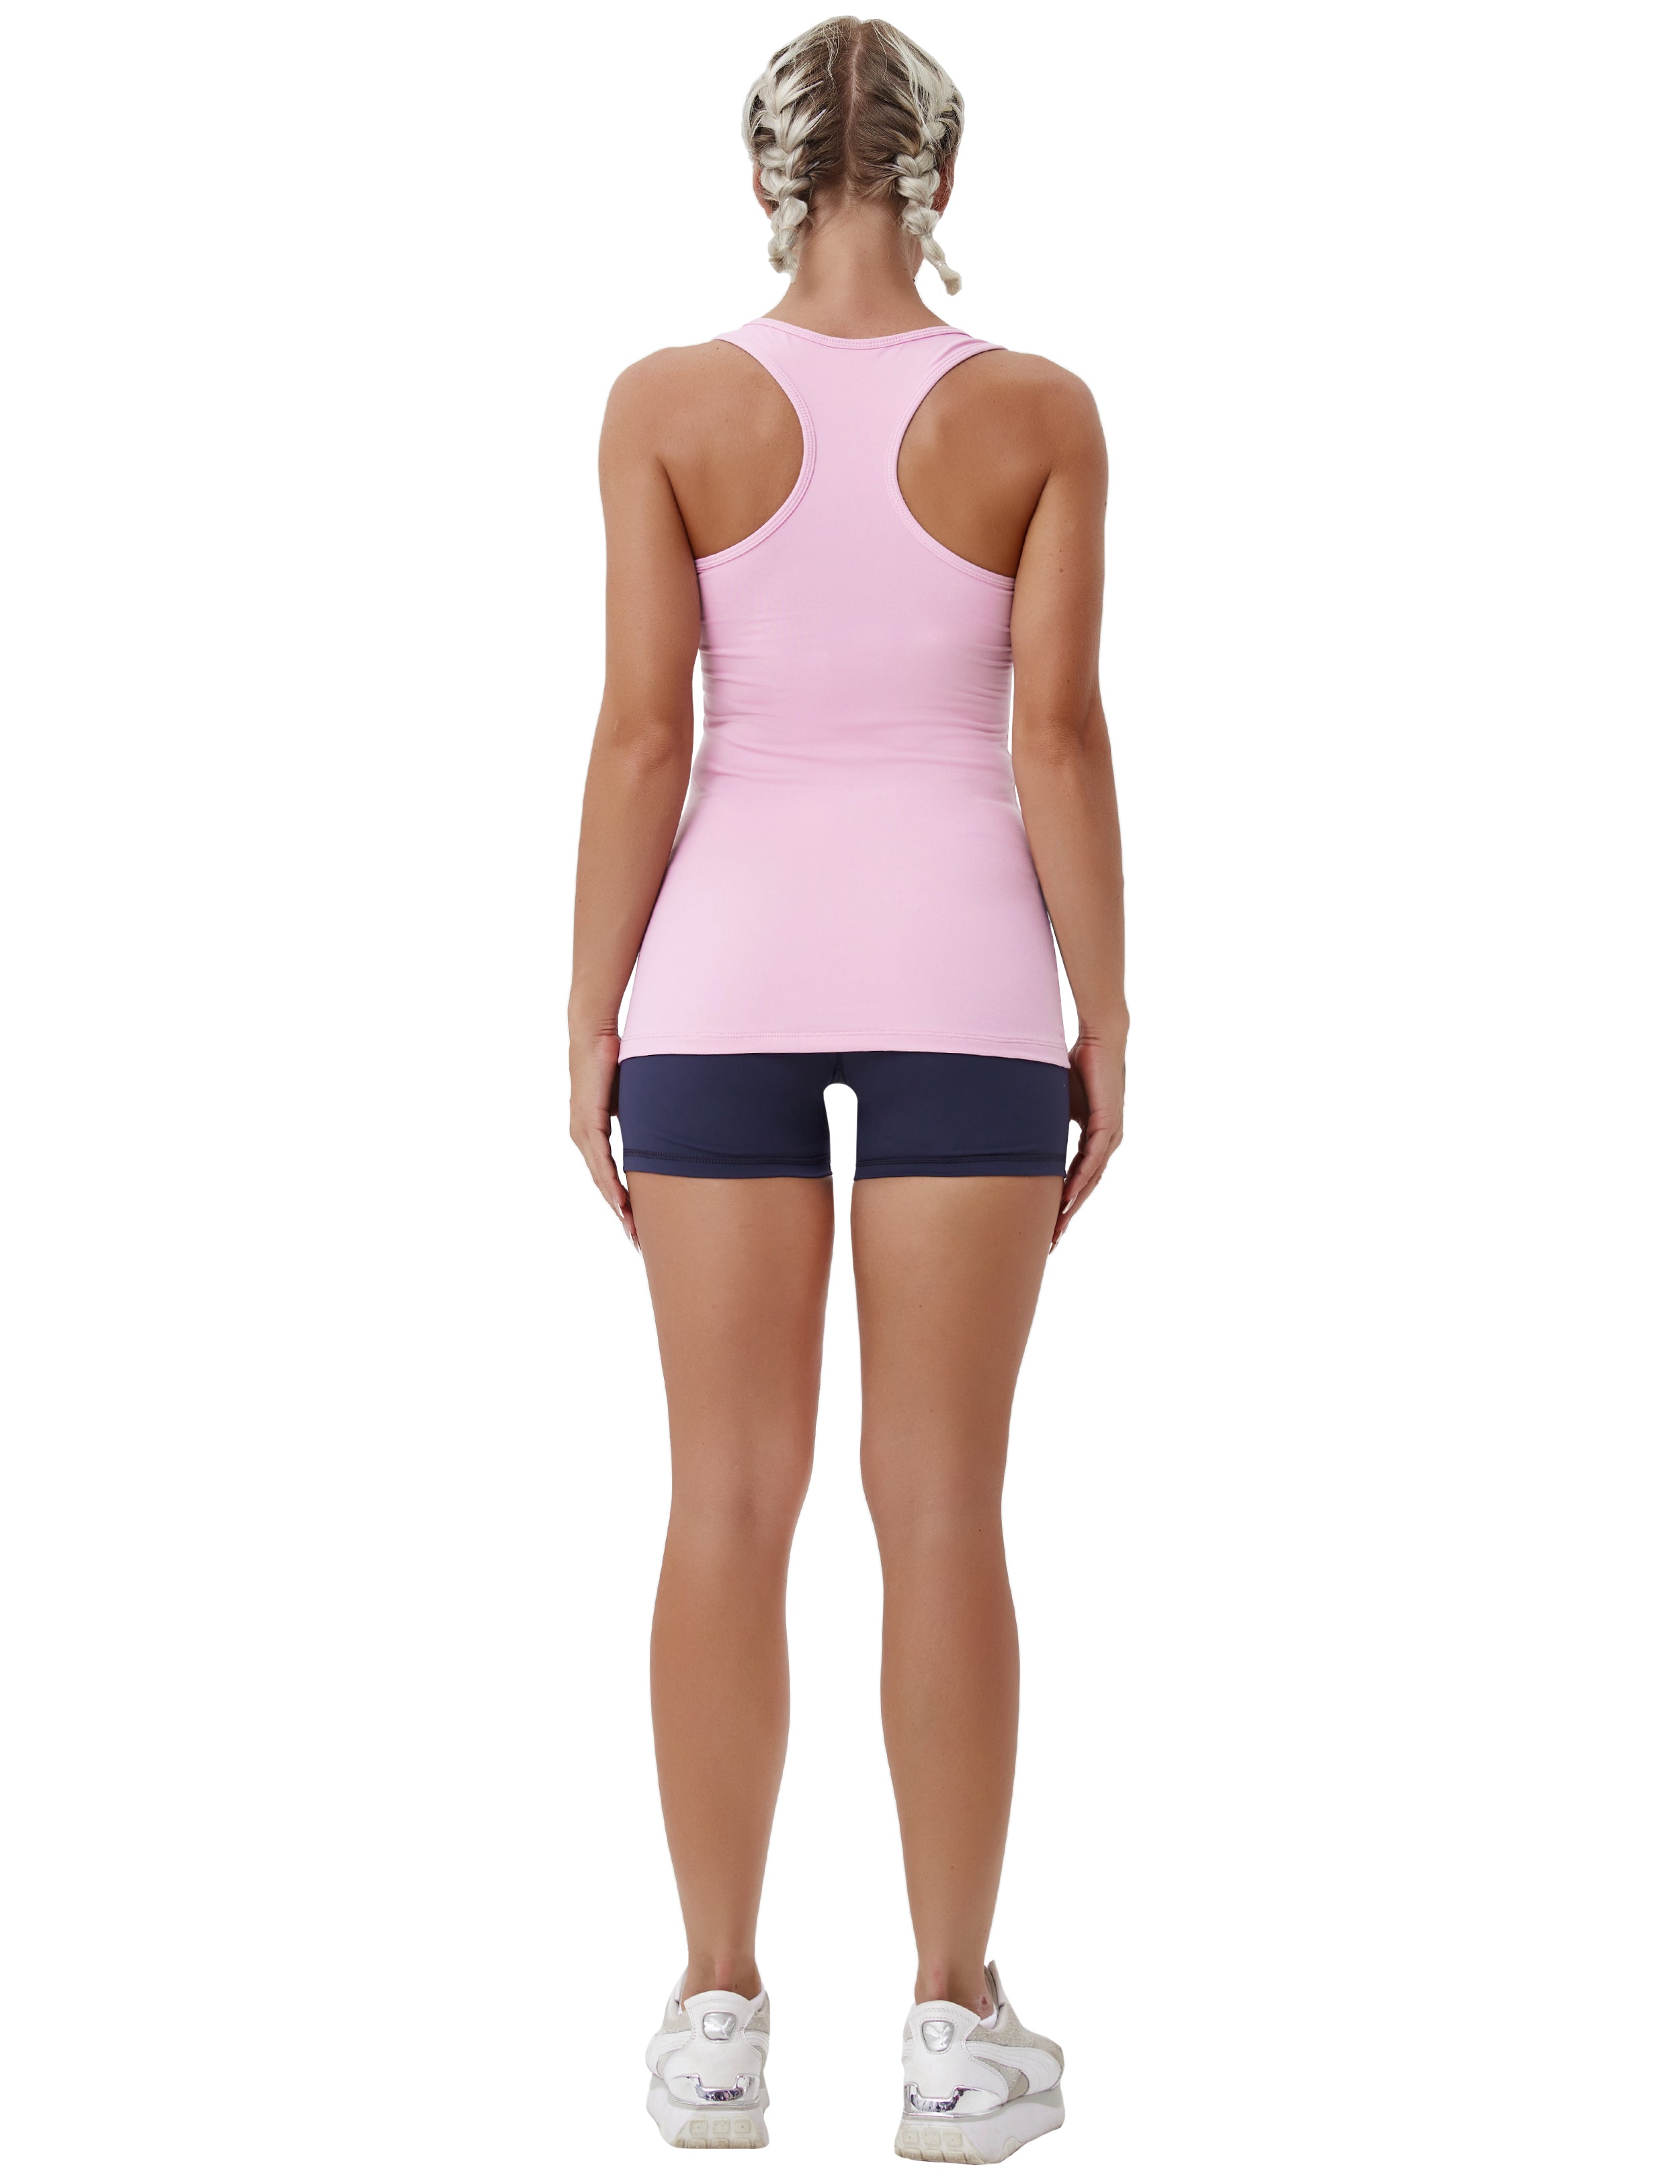 Racerback Athletic Tank Tops lightpink 92%Nylon/8%Spandex(Cotton Soft) Designed for Yoga Tight Fit So buttery soft, it feels weightless Sweat-wicking Four-way stretch Breathable Contours your body Sits below the waistband for moderate, everyday coverage